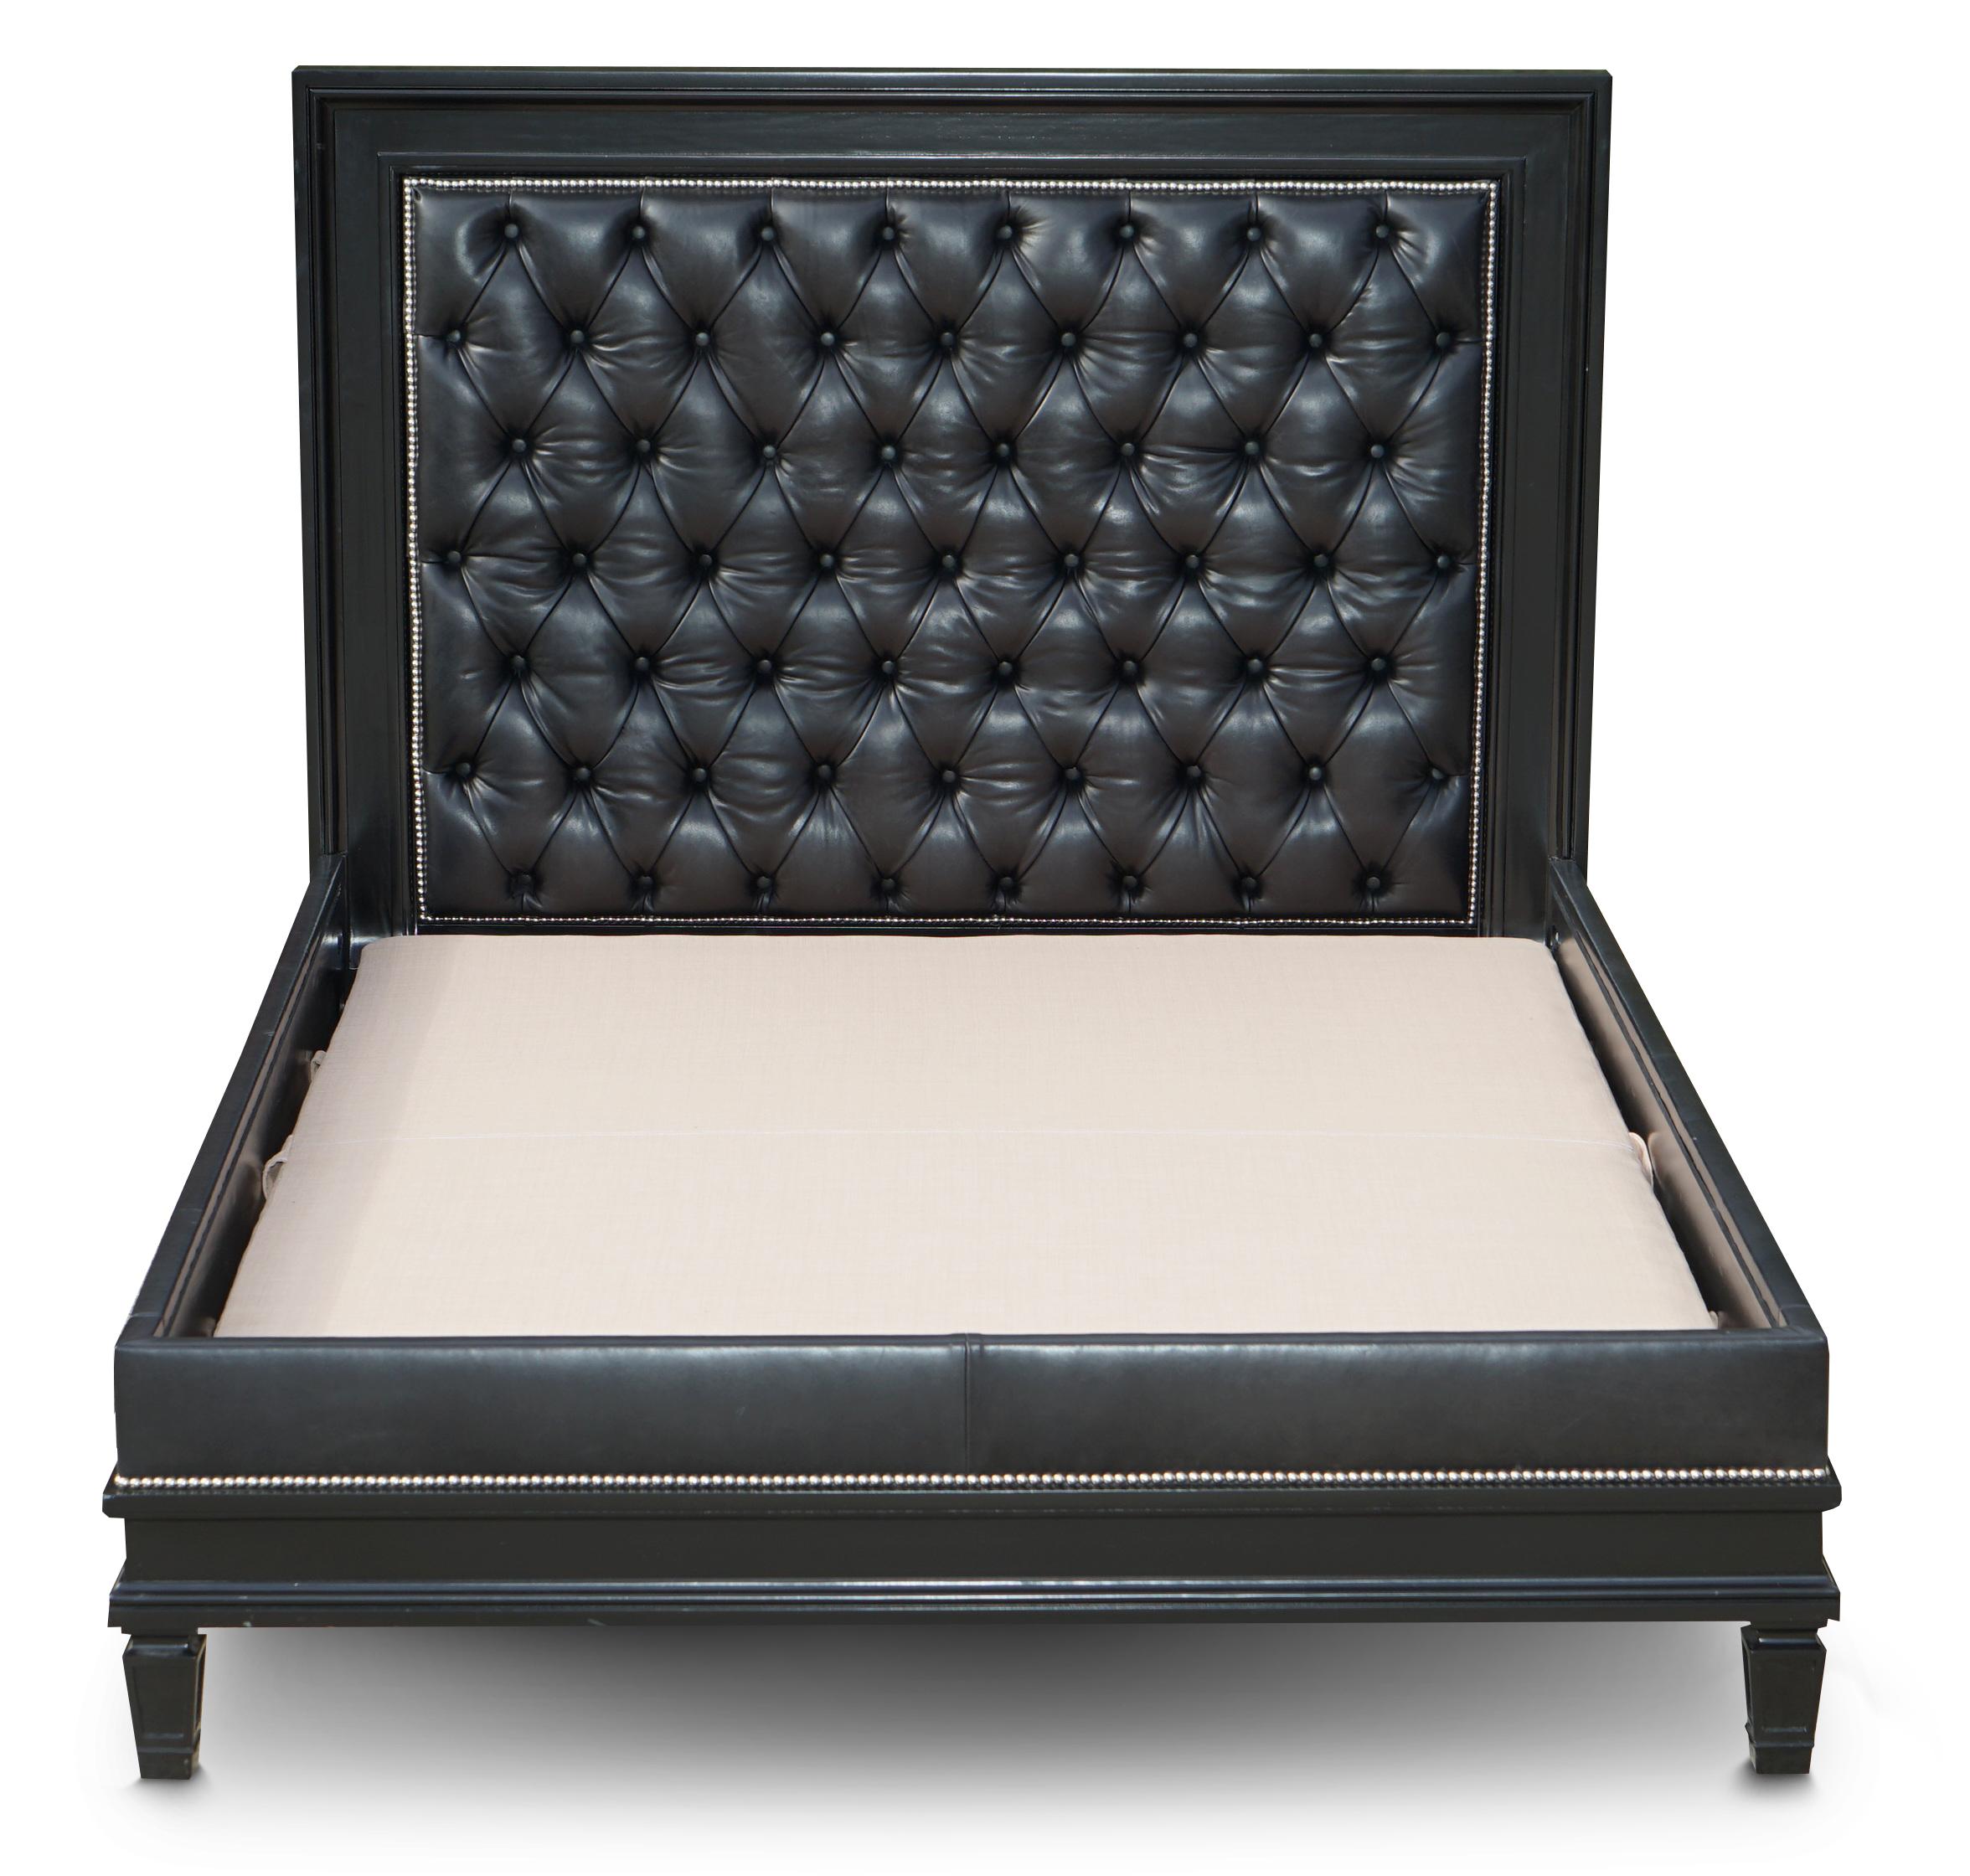 We are delighted to offer for sale this stunning handmade in America, RRP £17,000, Ralph Lauren Brook Street black leather and American Mahogany Chesterfield King Size bed.

A very good looking, extremely comfortable and well-made bed, this was